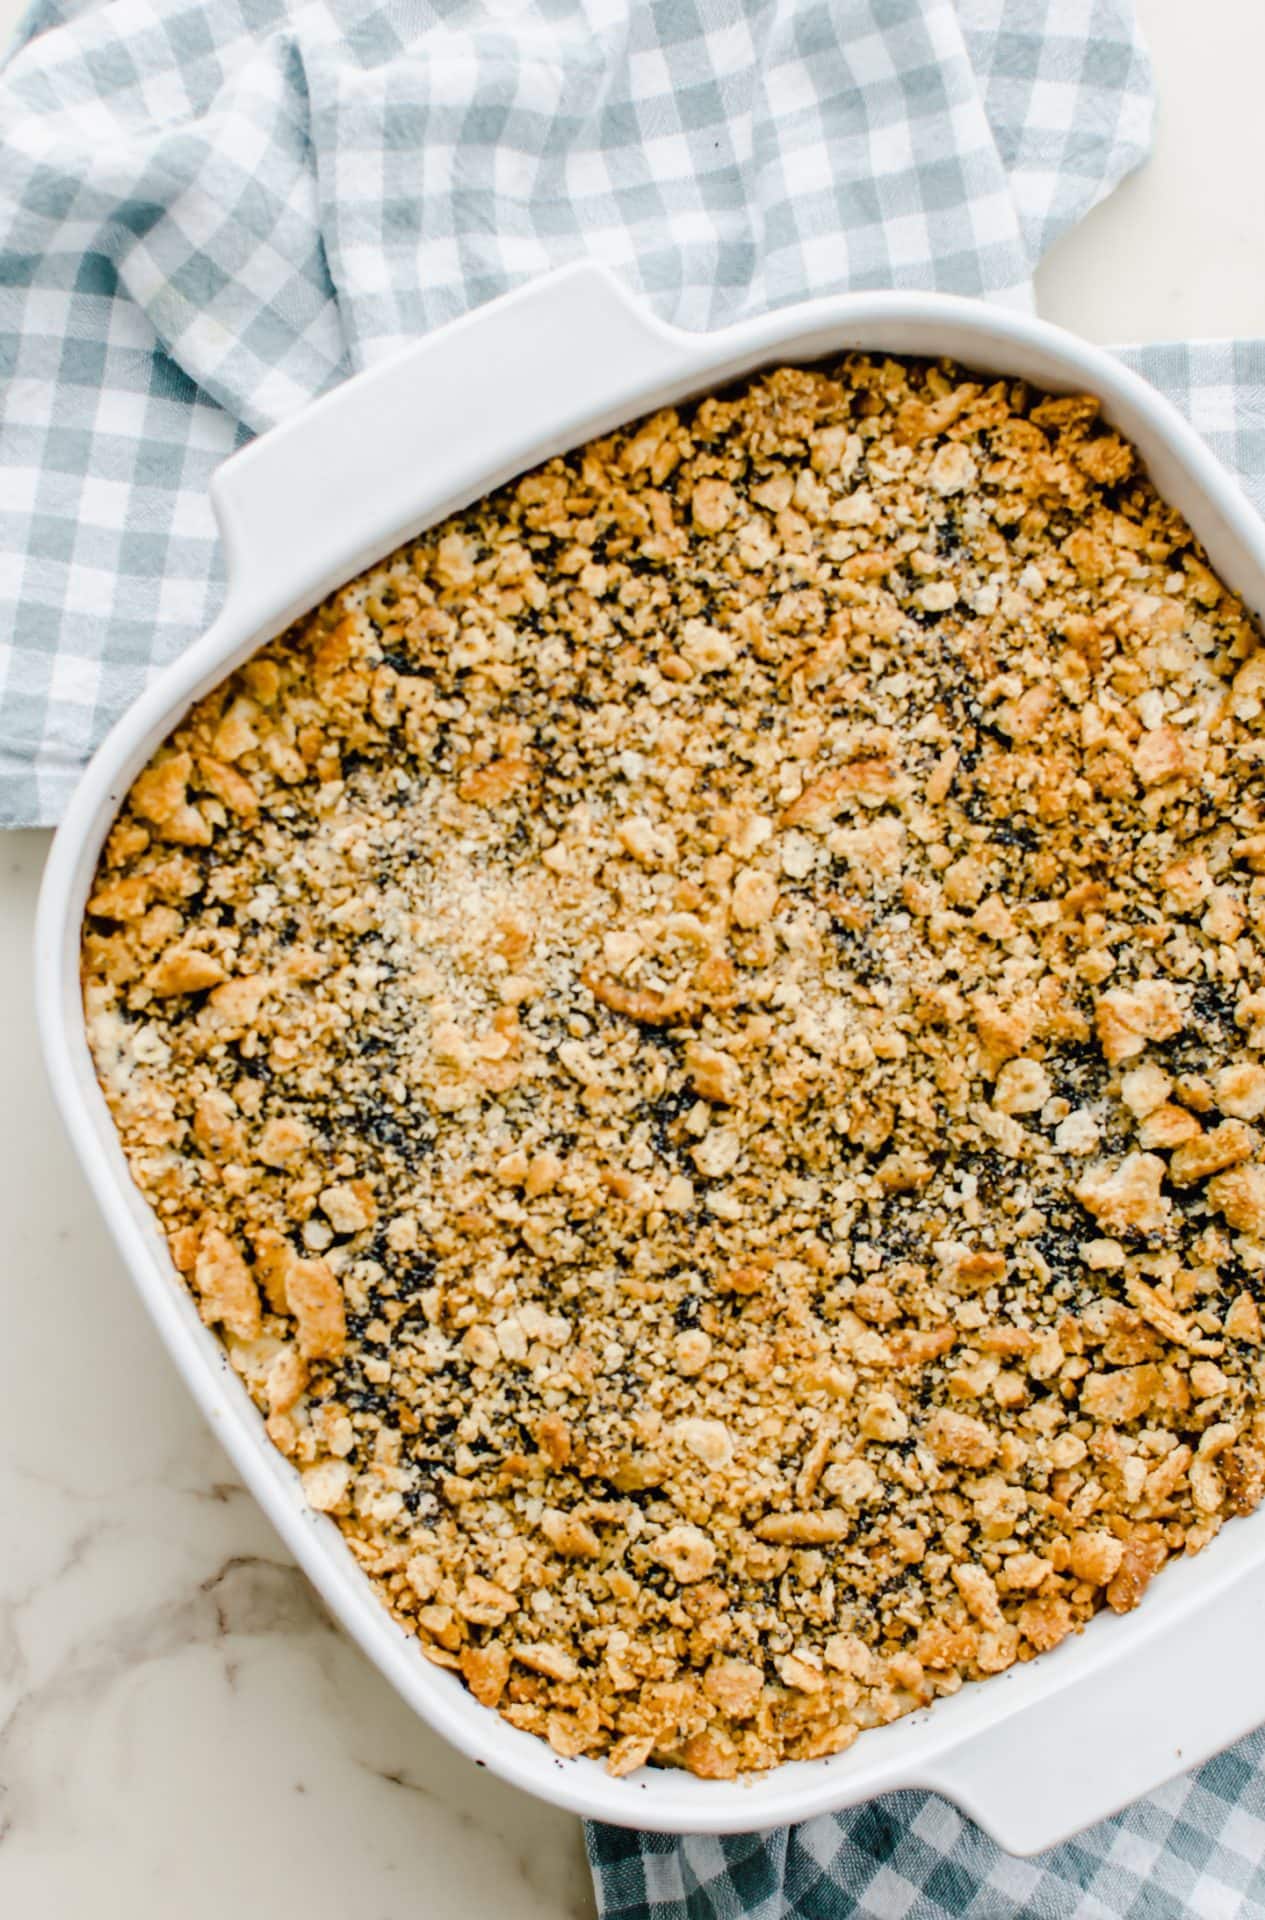 Baked poppy seed chicken casserole in a white baking dish.